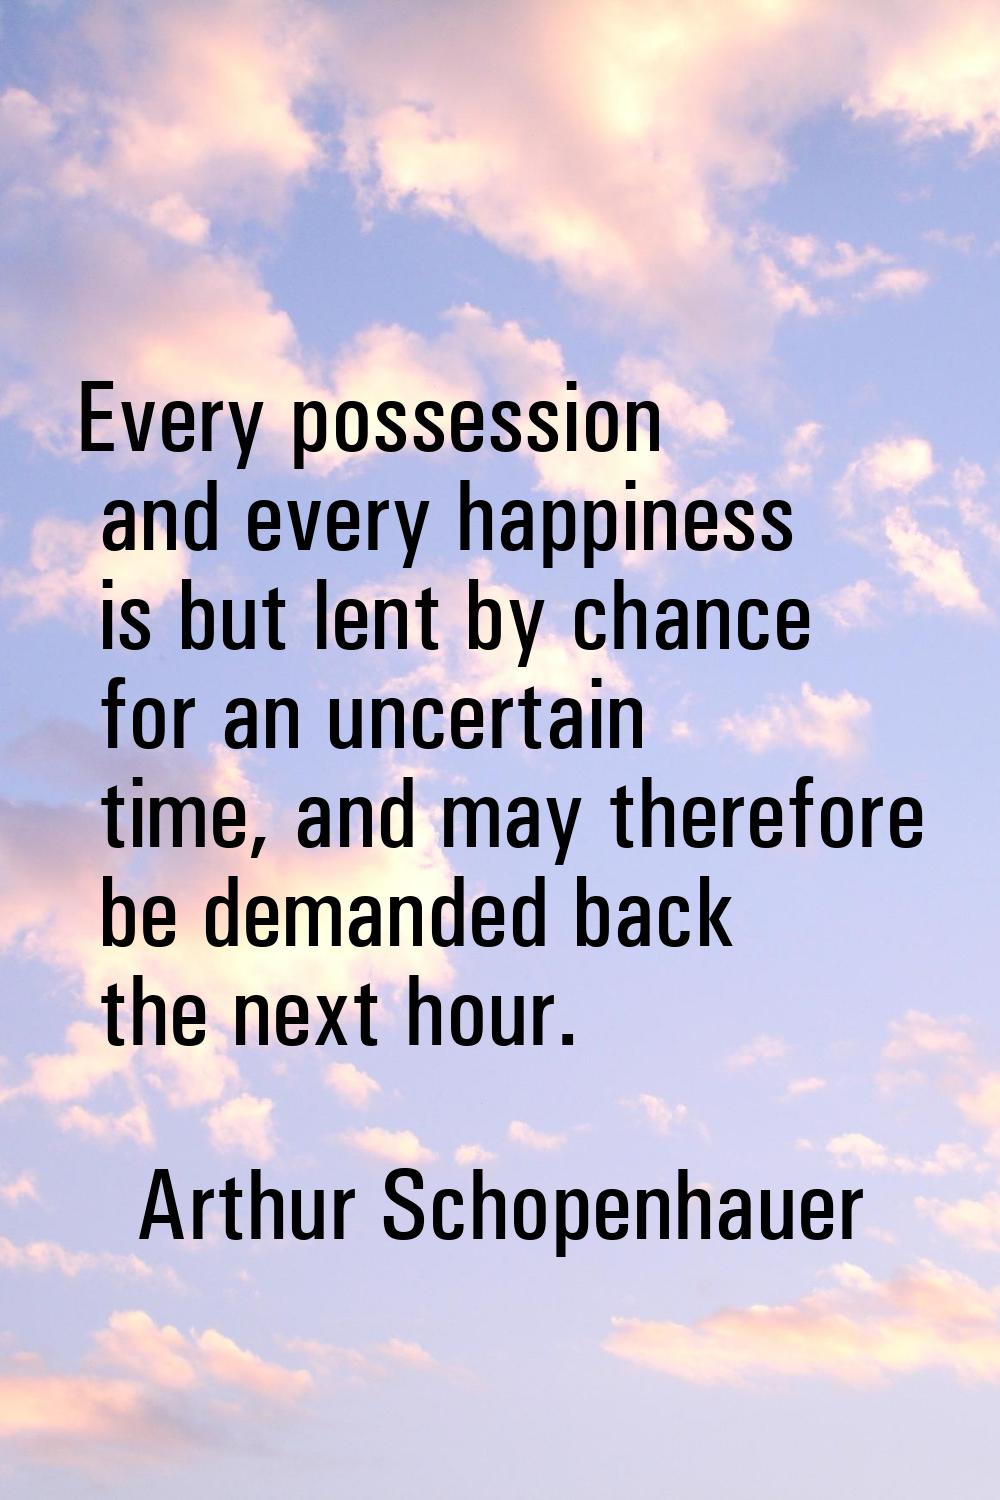 Every possession and every happiness is but lent by chance for an uncertain time, and may therefore